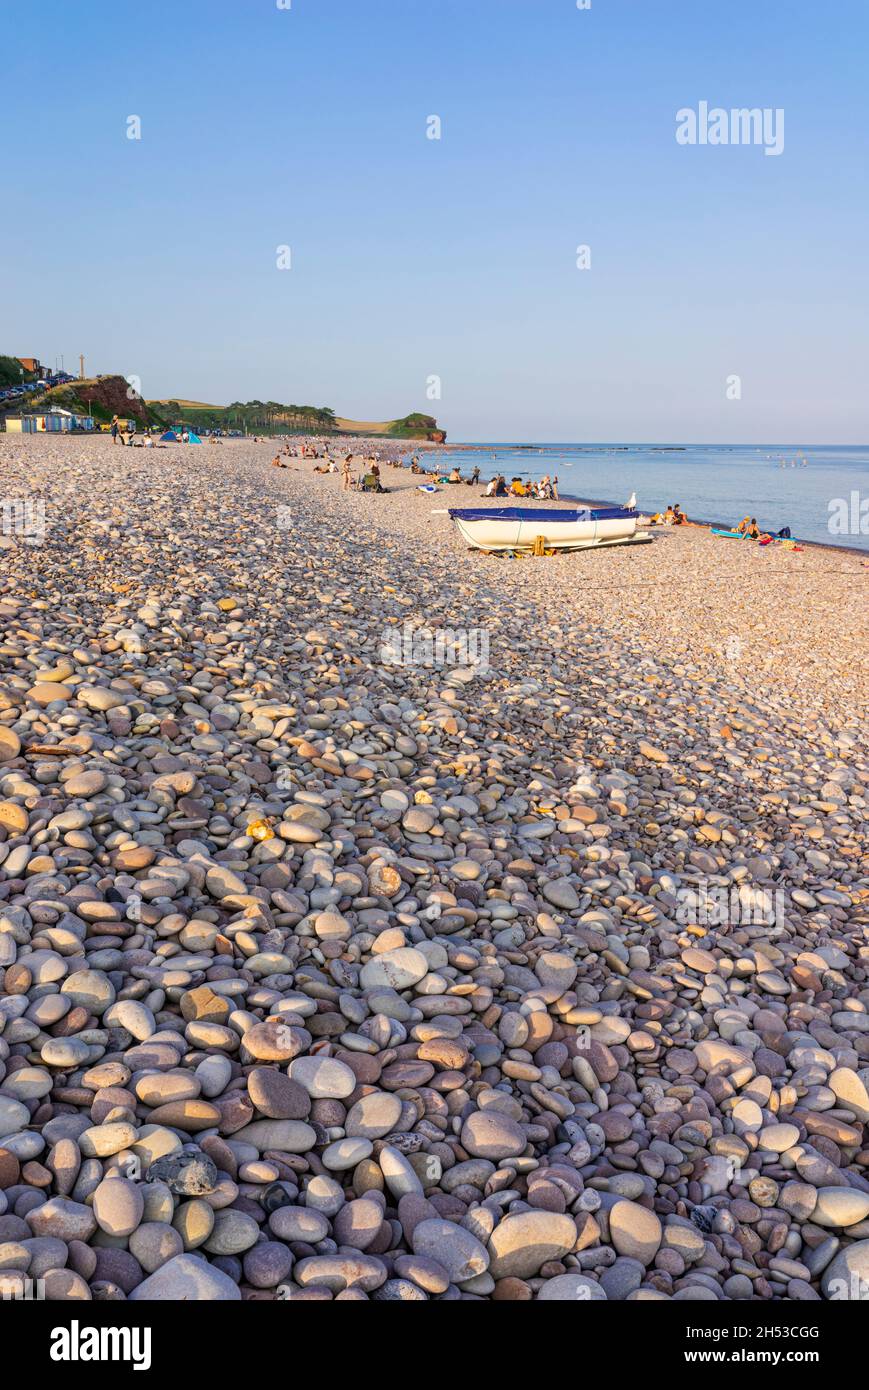 Dusk and Upturned boats on the Pebble beach at Budleigh Salterton beach Devon England UK GB Europe Stock Photo